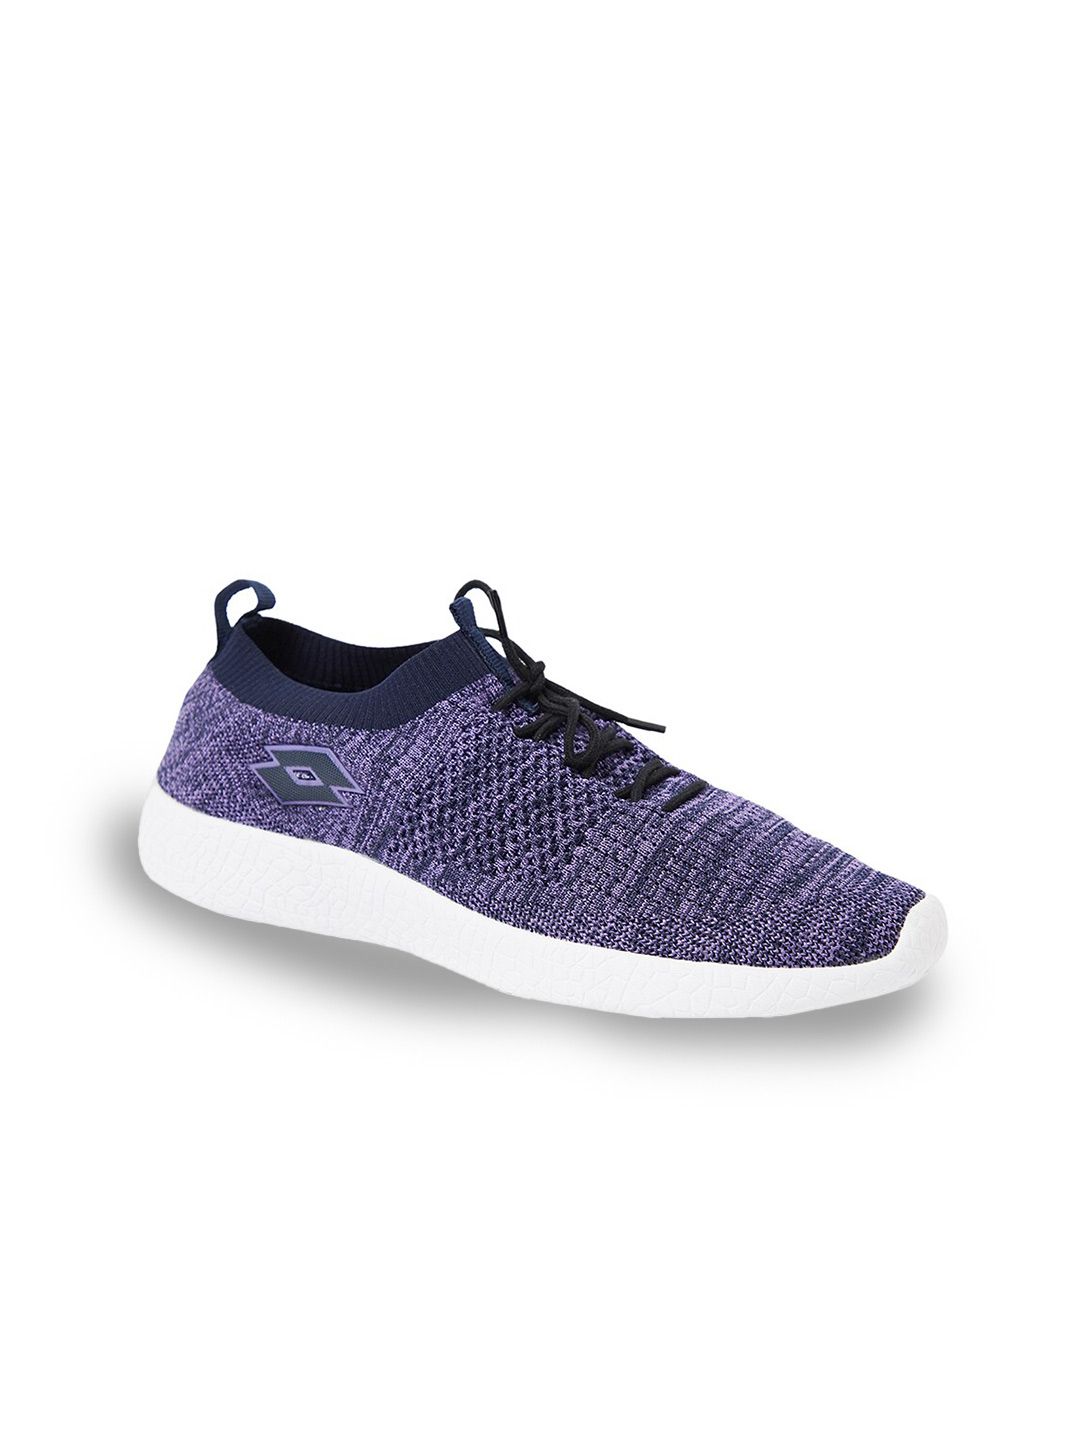 Lotto Women Navy Blue Mesh Walking Shoes Price in India